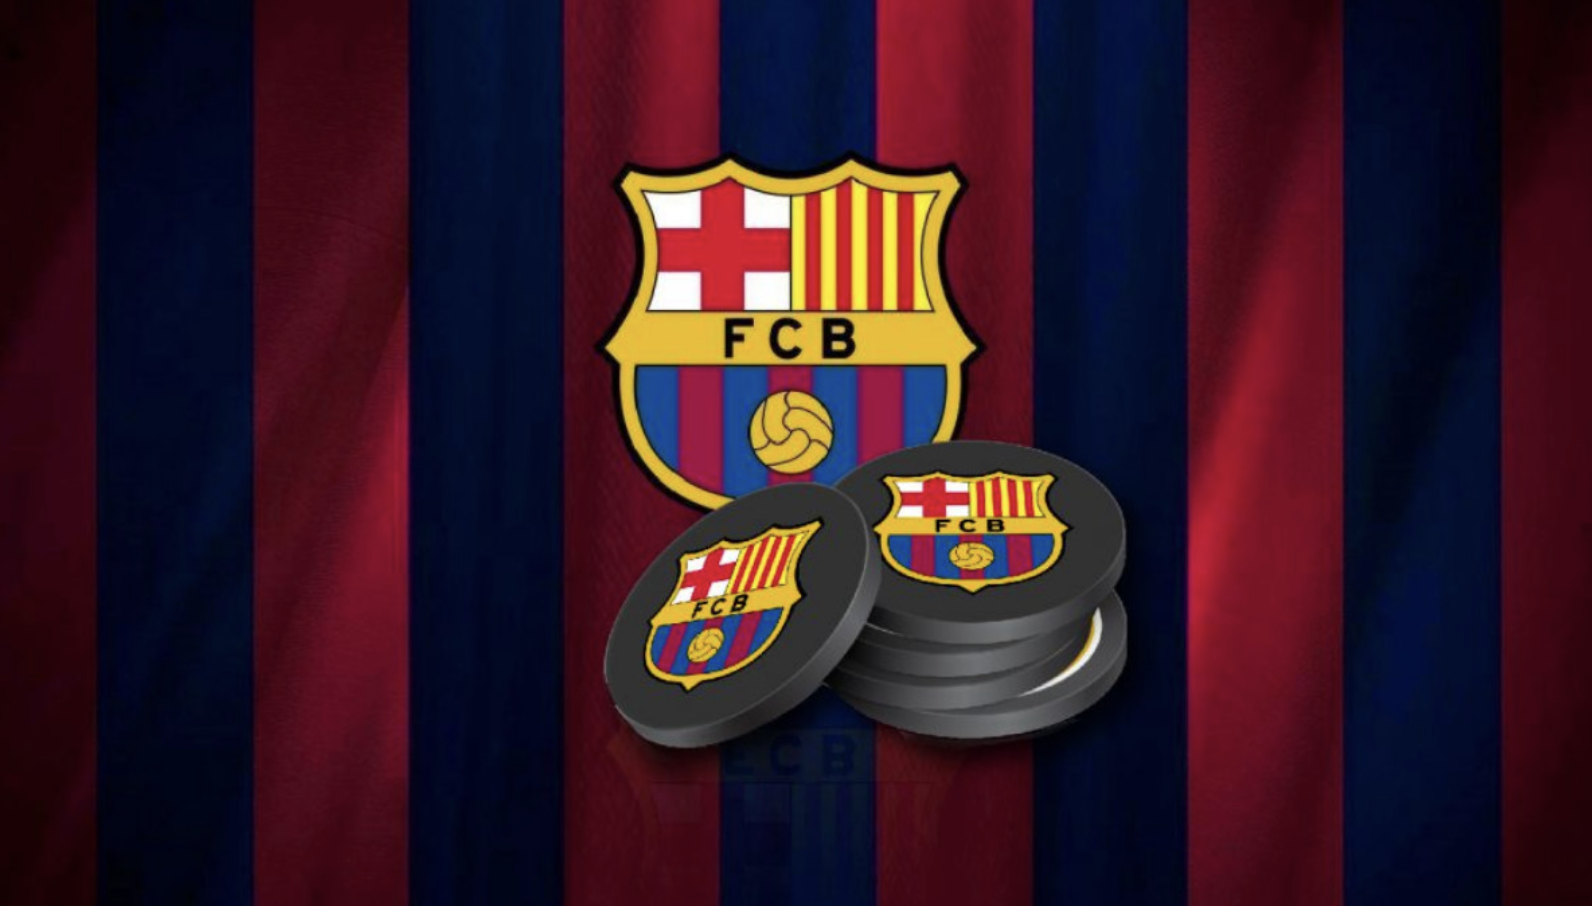 FC Barcelona Fan Token is the fan token of Barcelona, one of the world`s largest football clubs. Continue Reading: How to Get FC Barcelona Fan Token?